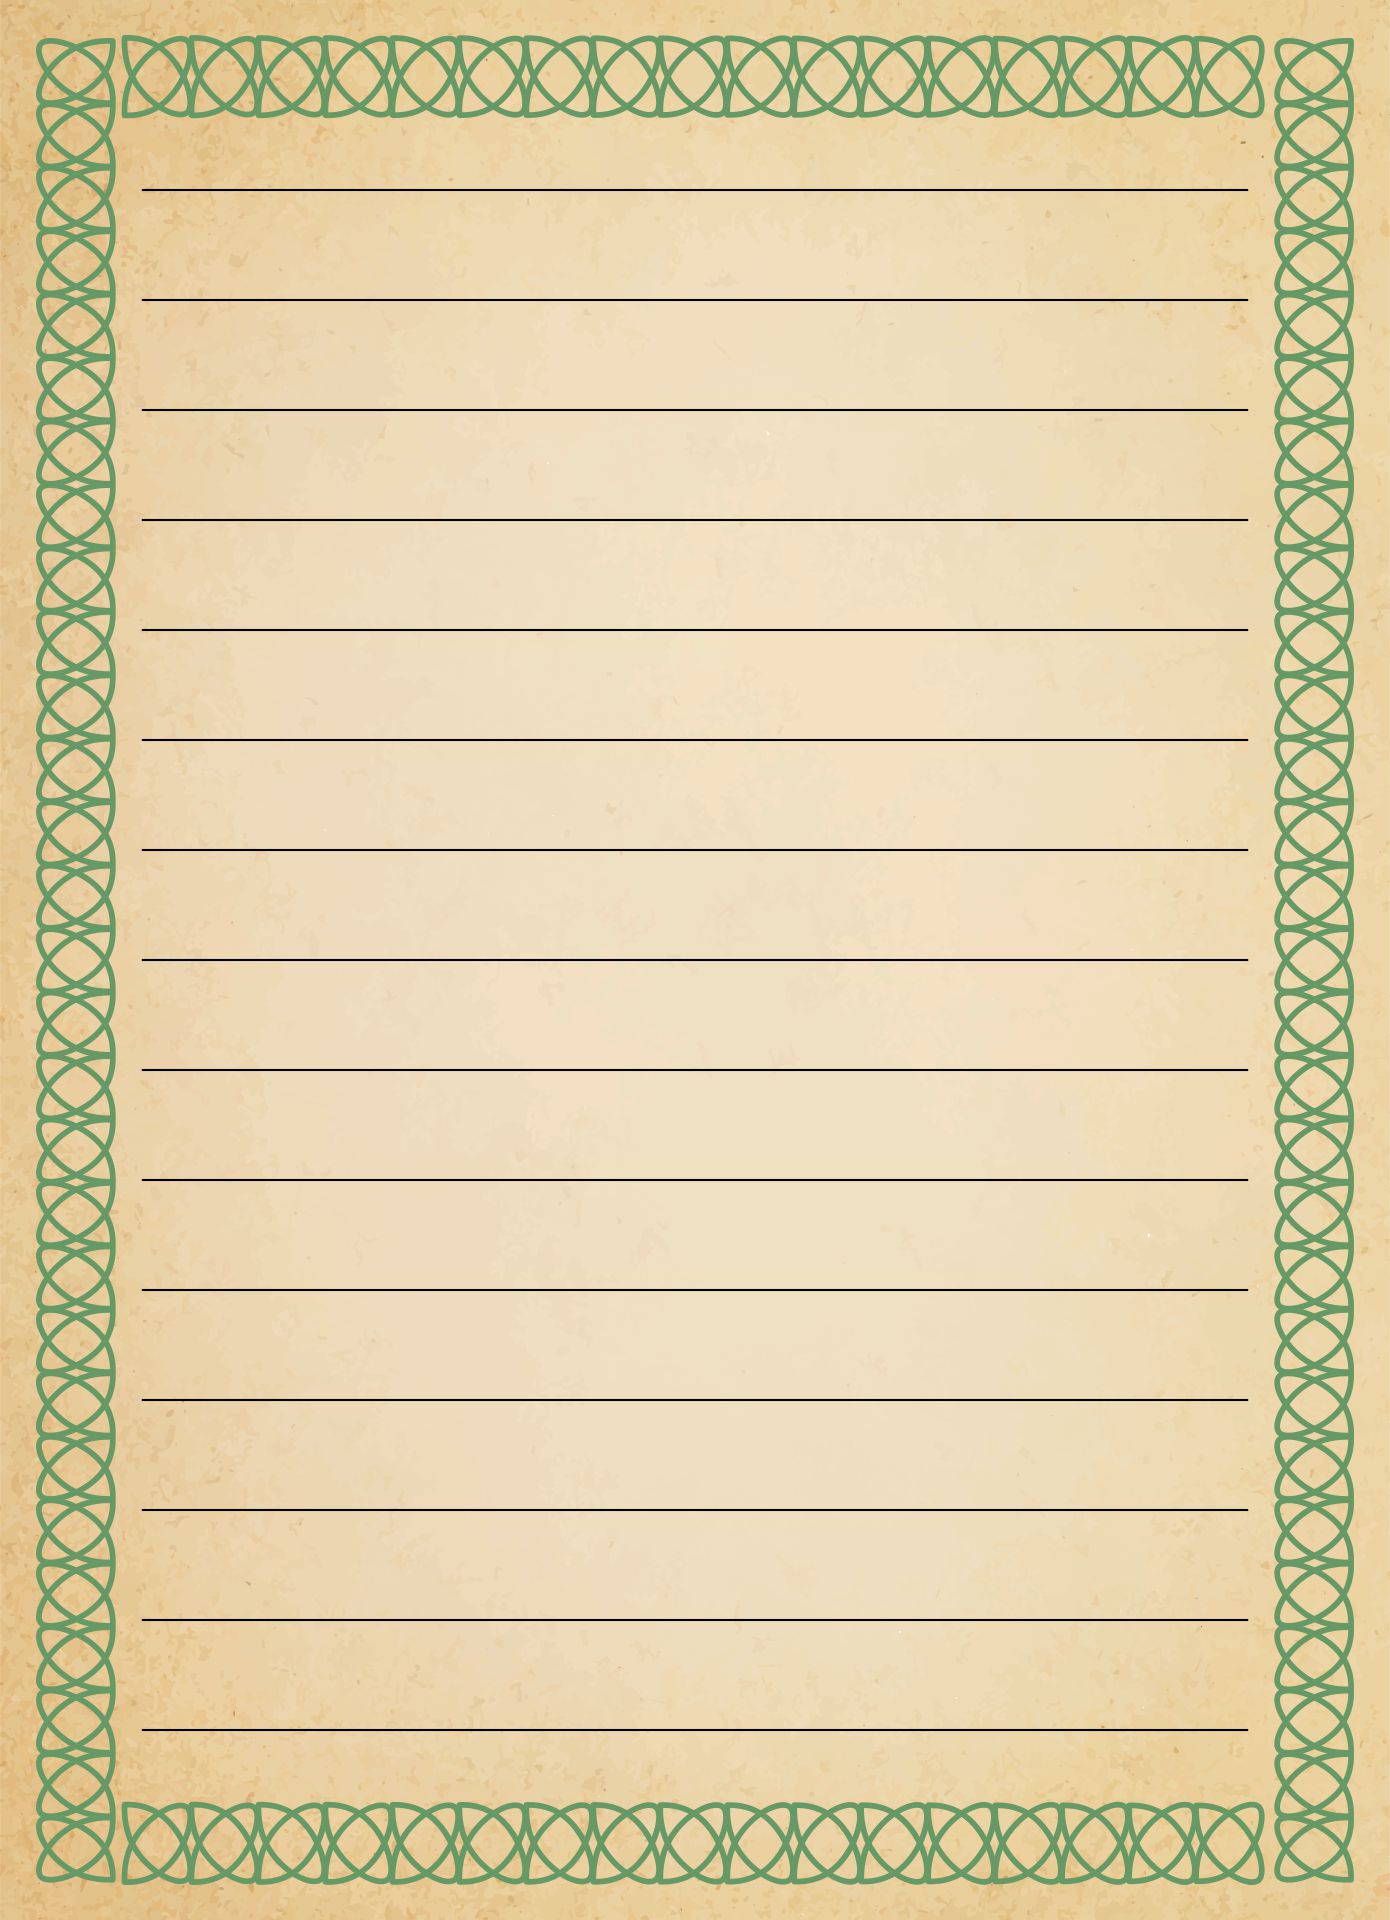 Free Printable Vintage Writing Paper Get What You Need For Free